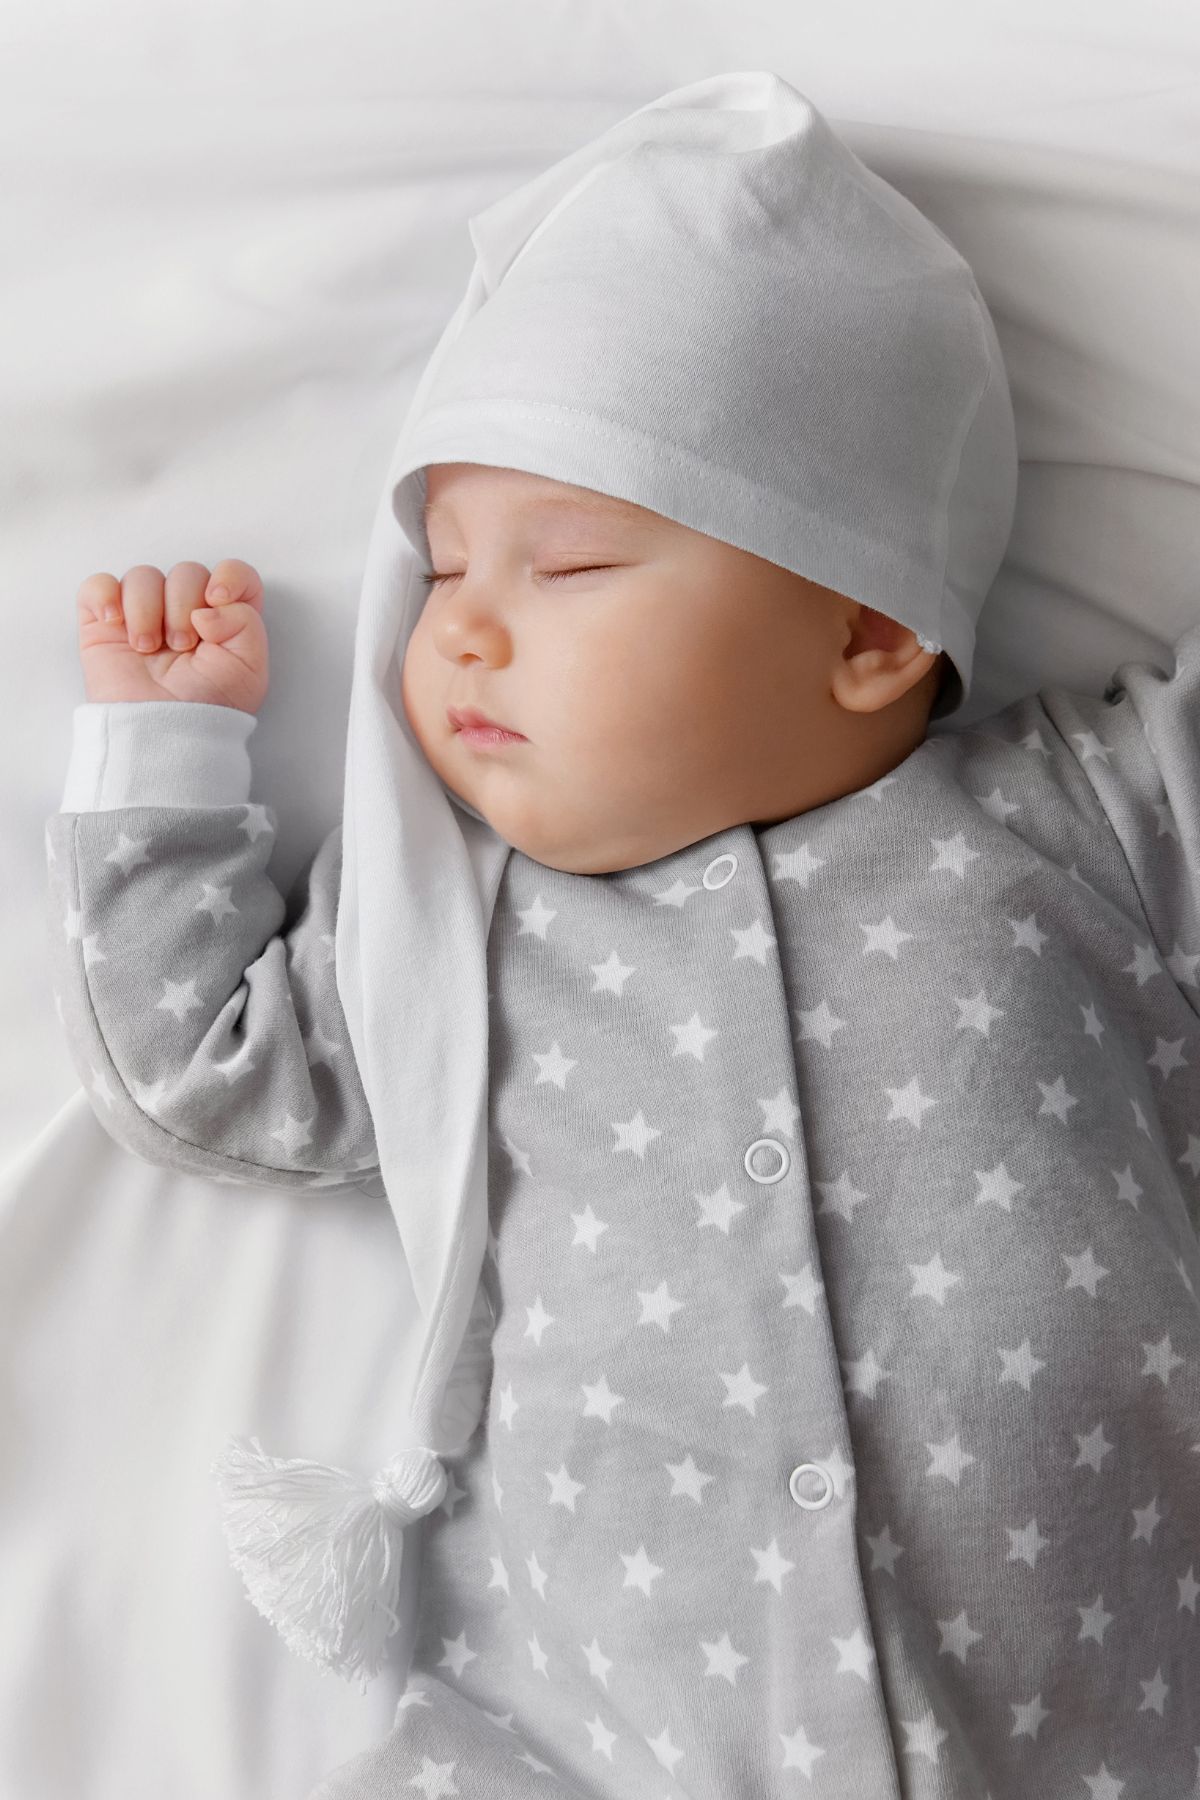 A baby sleeping in gray and white pajamas with a matching sleep cap.